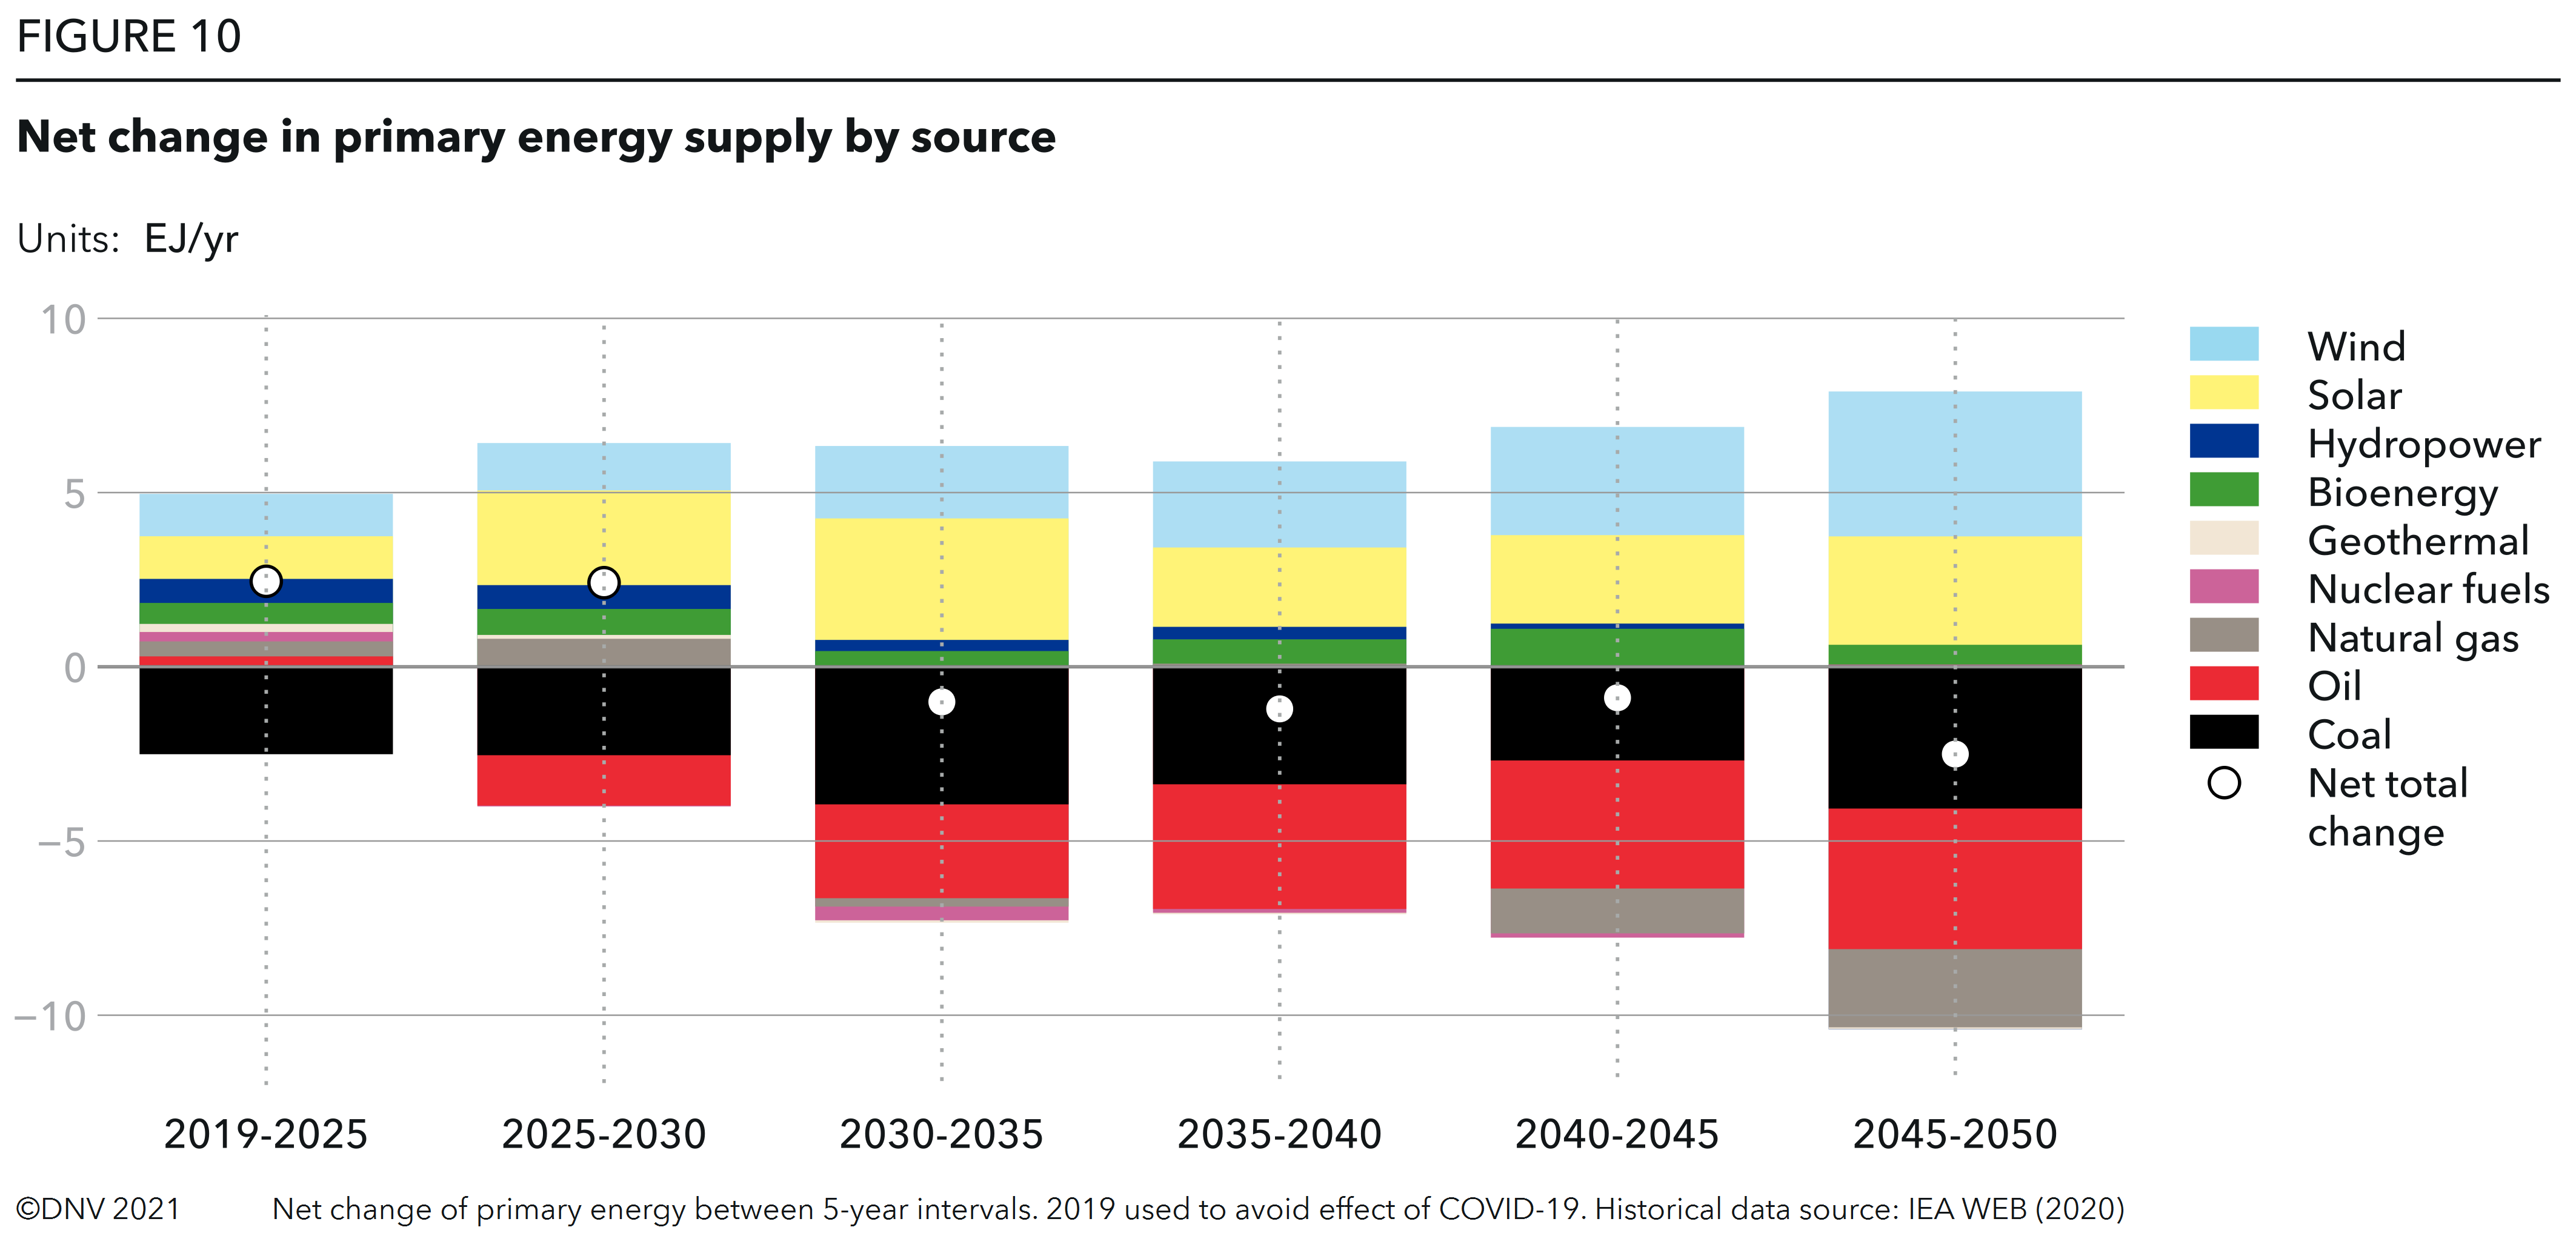 FIGURE 10 Net change in primary energy supply by source